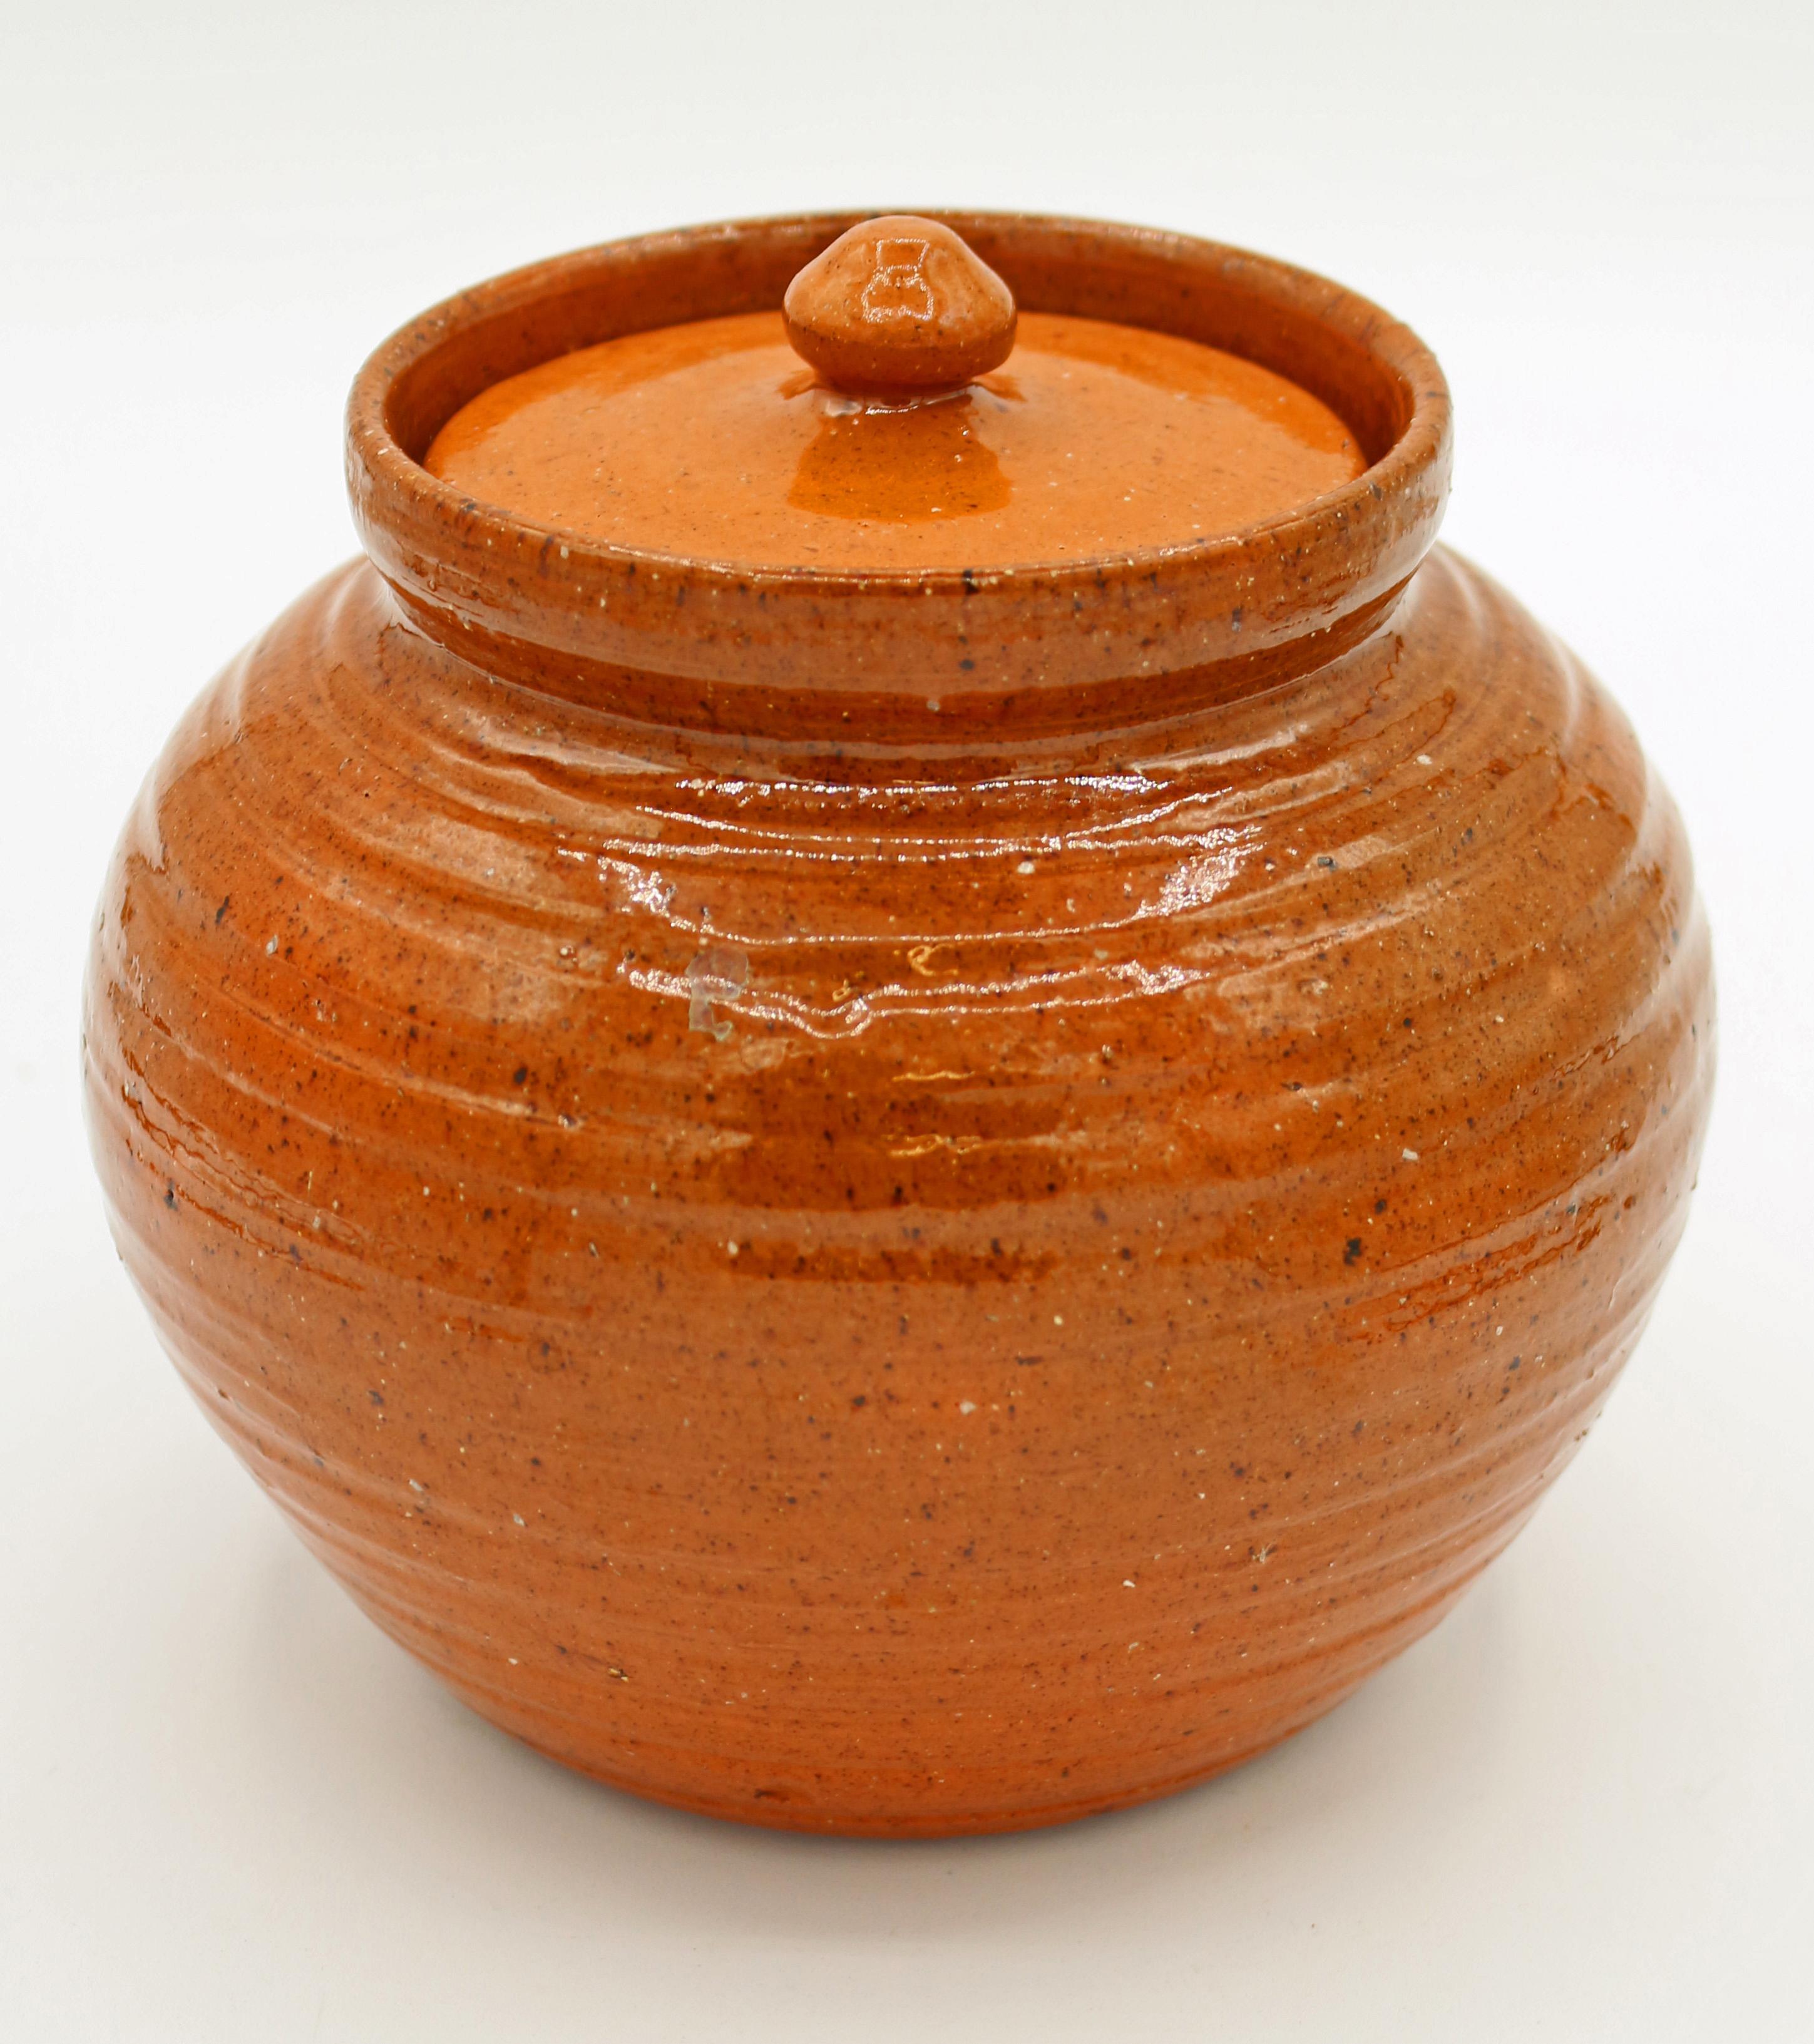 c. 1930-50s covered pottery pot by Ben Owen I, 1st Jugtown mark. The turning lines are elegant. Orange glazes. The cover is a perfect fit, even if lighter in color. Provenance: Tranquil Corners Antiques and found in CT; collection of Katherine Reid,